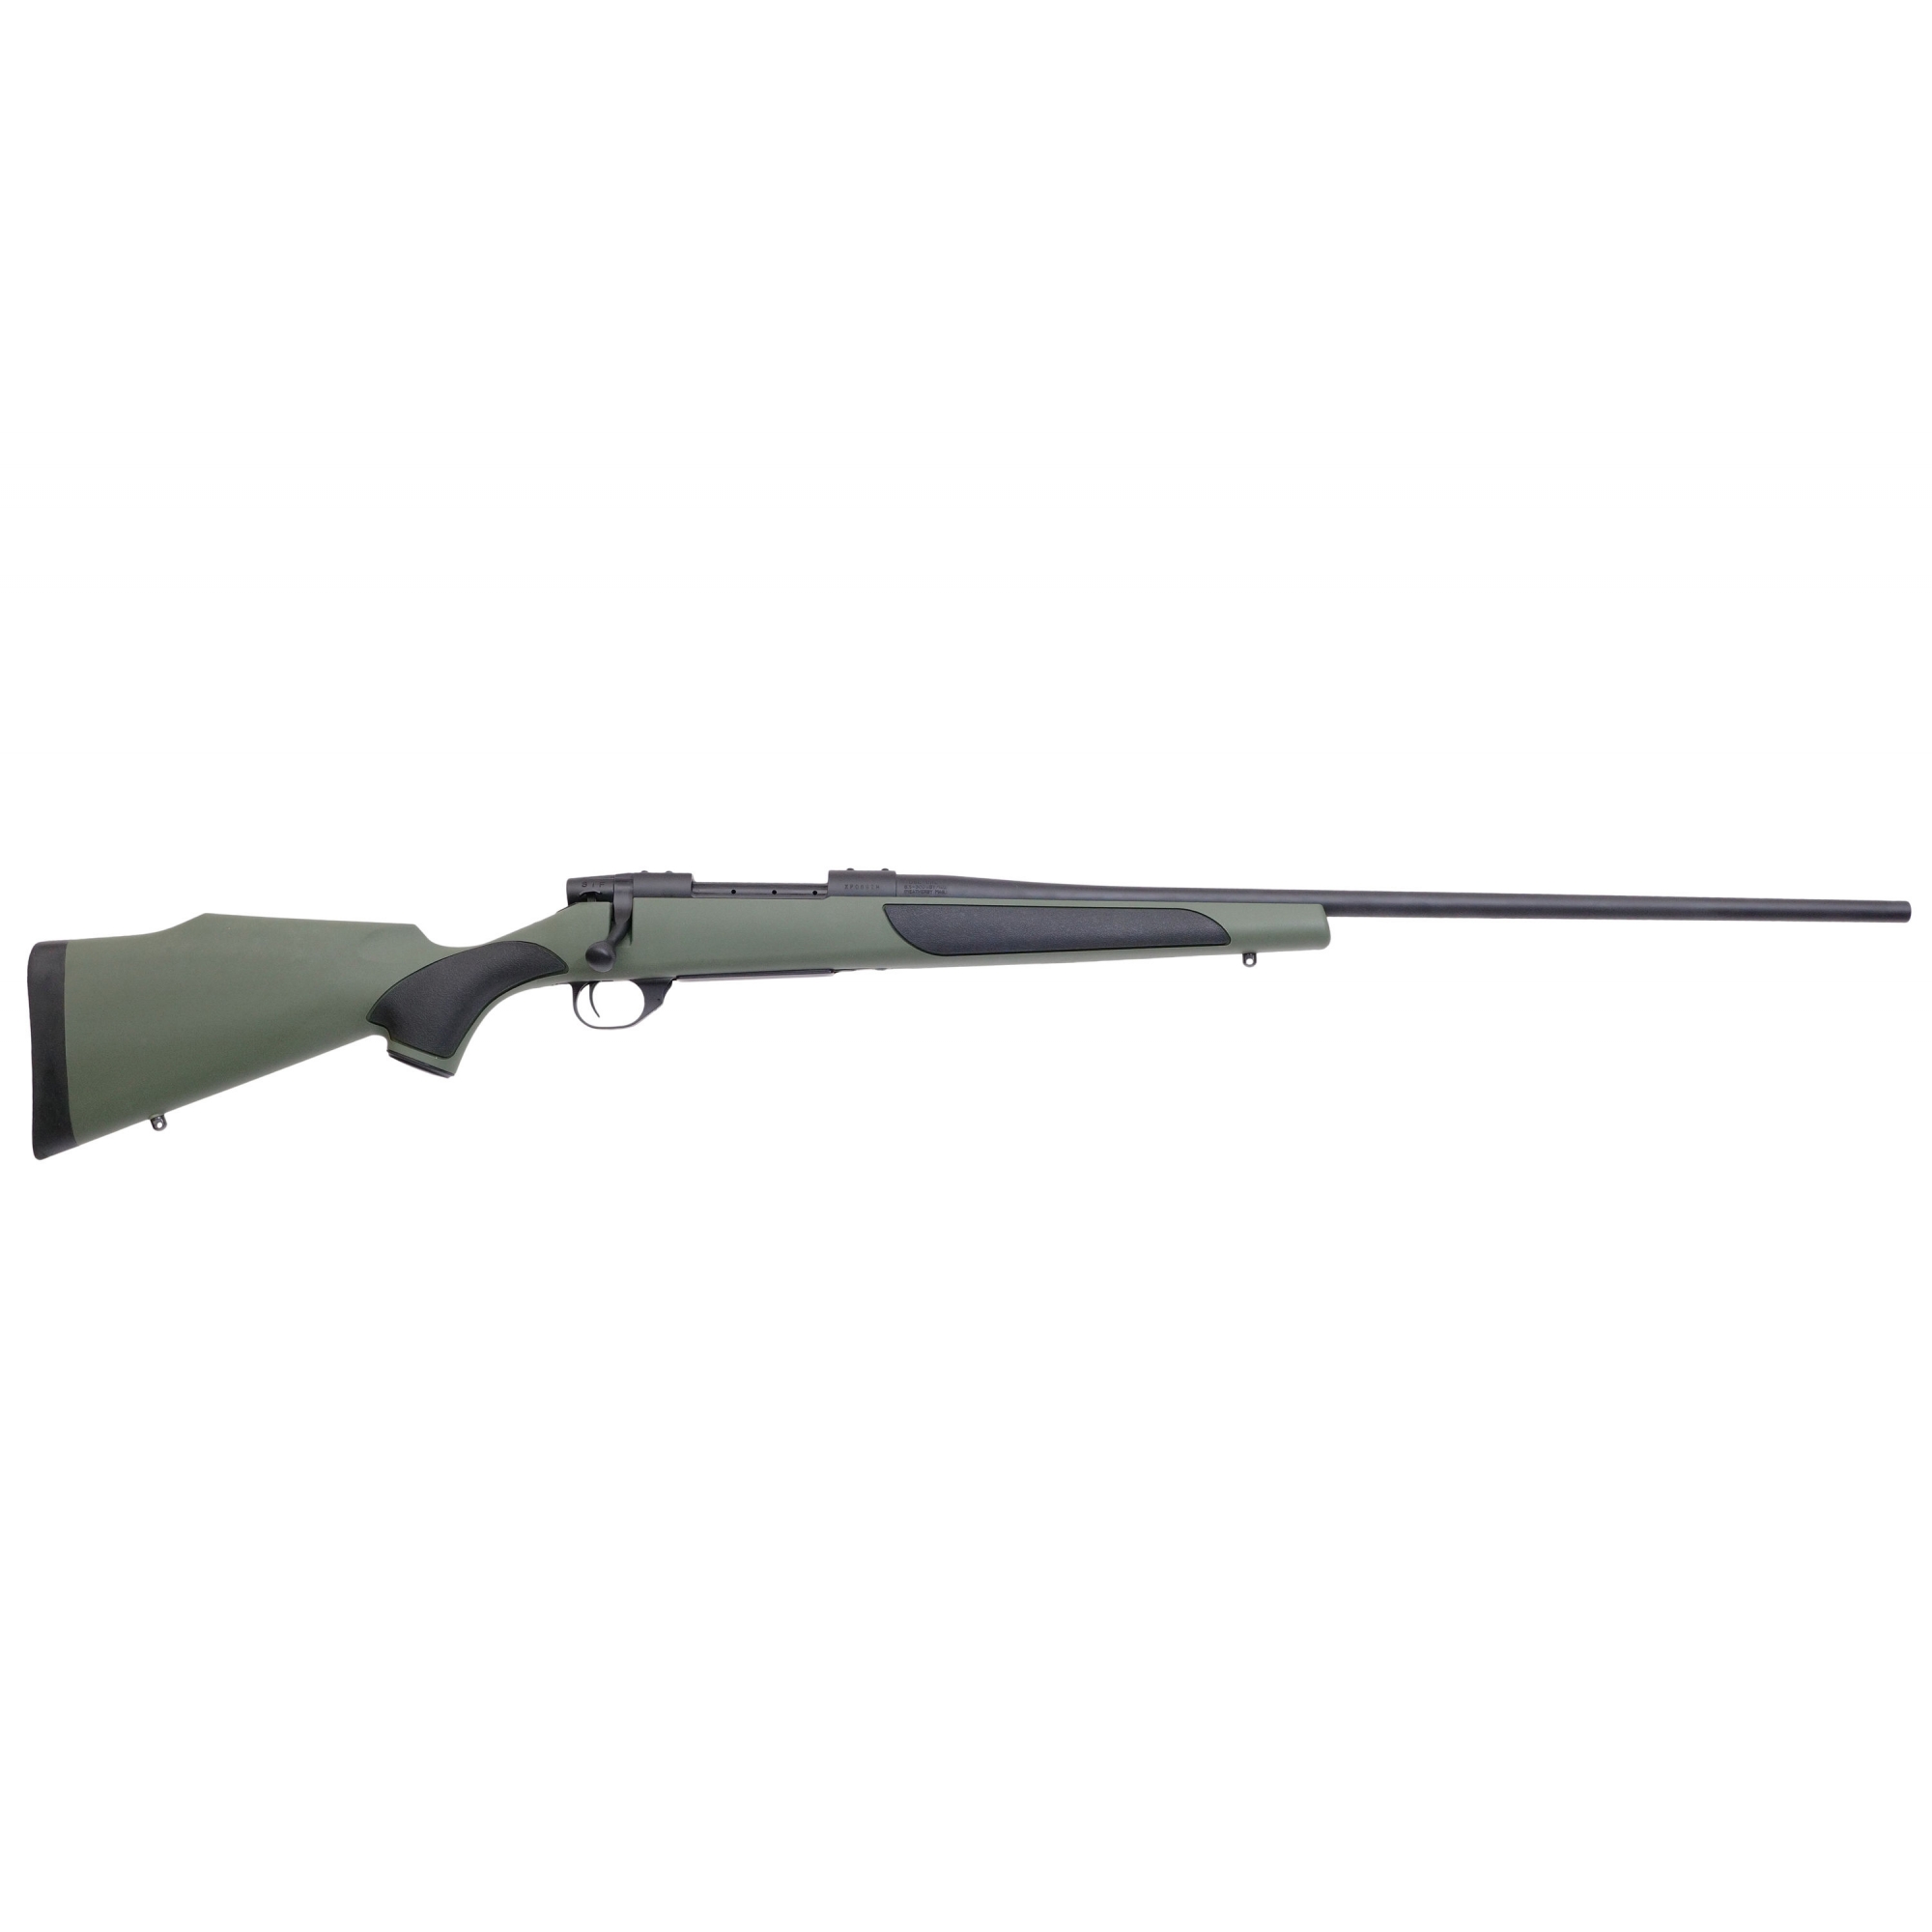 Rifle Weatherby Vanguard Synthetic Green Cal 300 Win 5 tiros 26